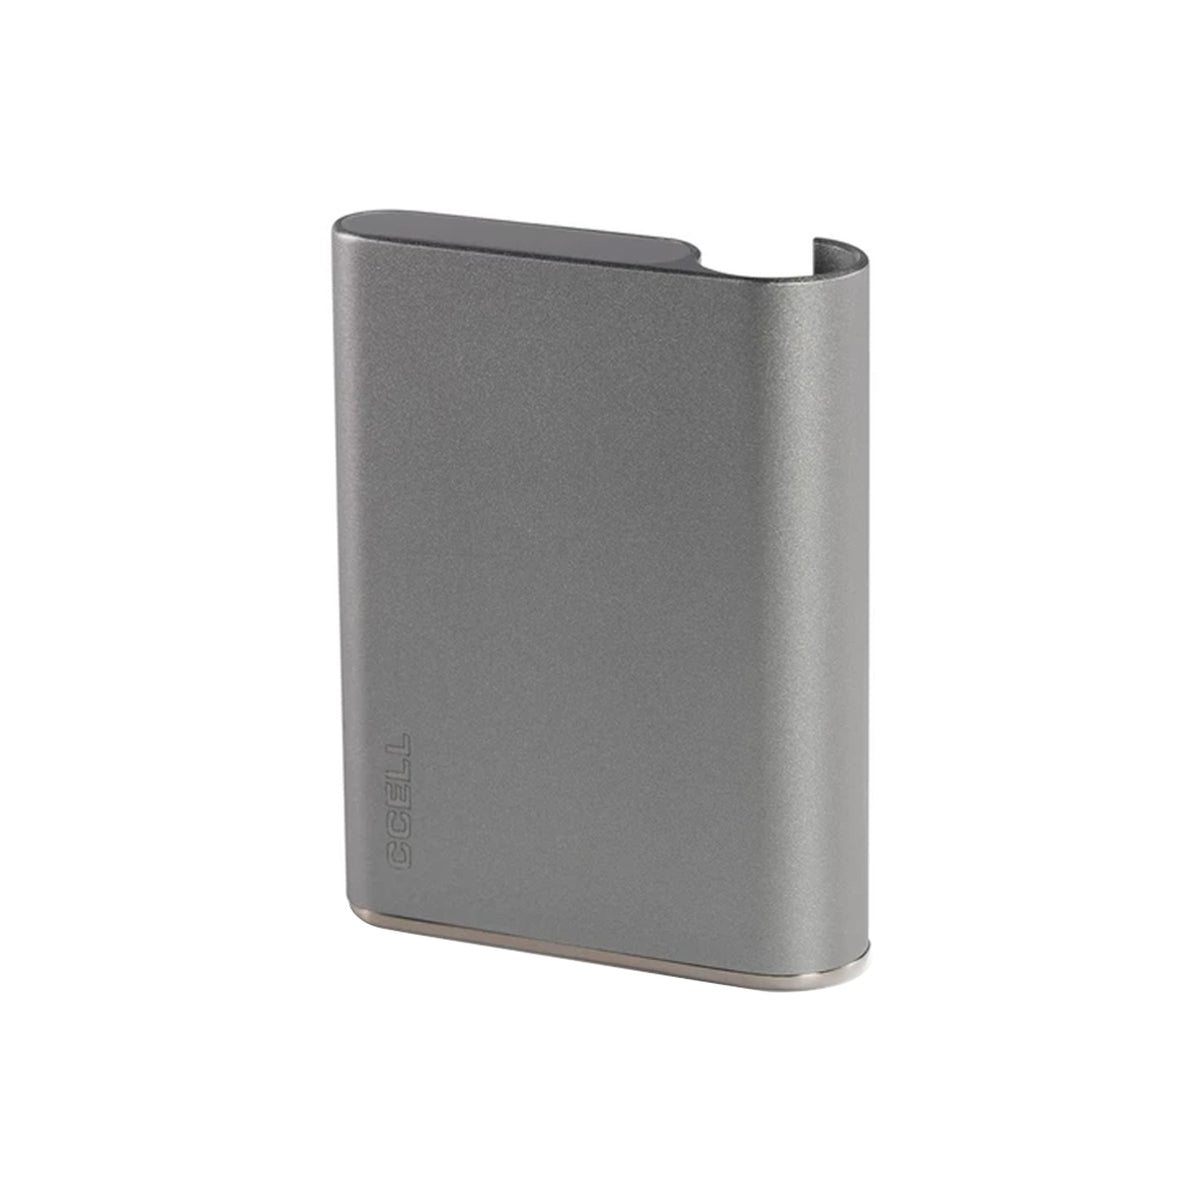 The Palm is one of CCELL's quality cartridge vaporizer batteries that combines performance with a compact design, that fits effortlessly into the palm of your hand. An aluminum alloy housing offers a clean and sophisticated aesthetic, while the magnetic connector creates a seamless drop-in system to swap out your cartridges.